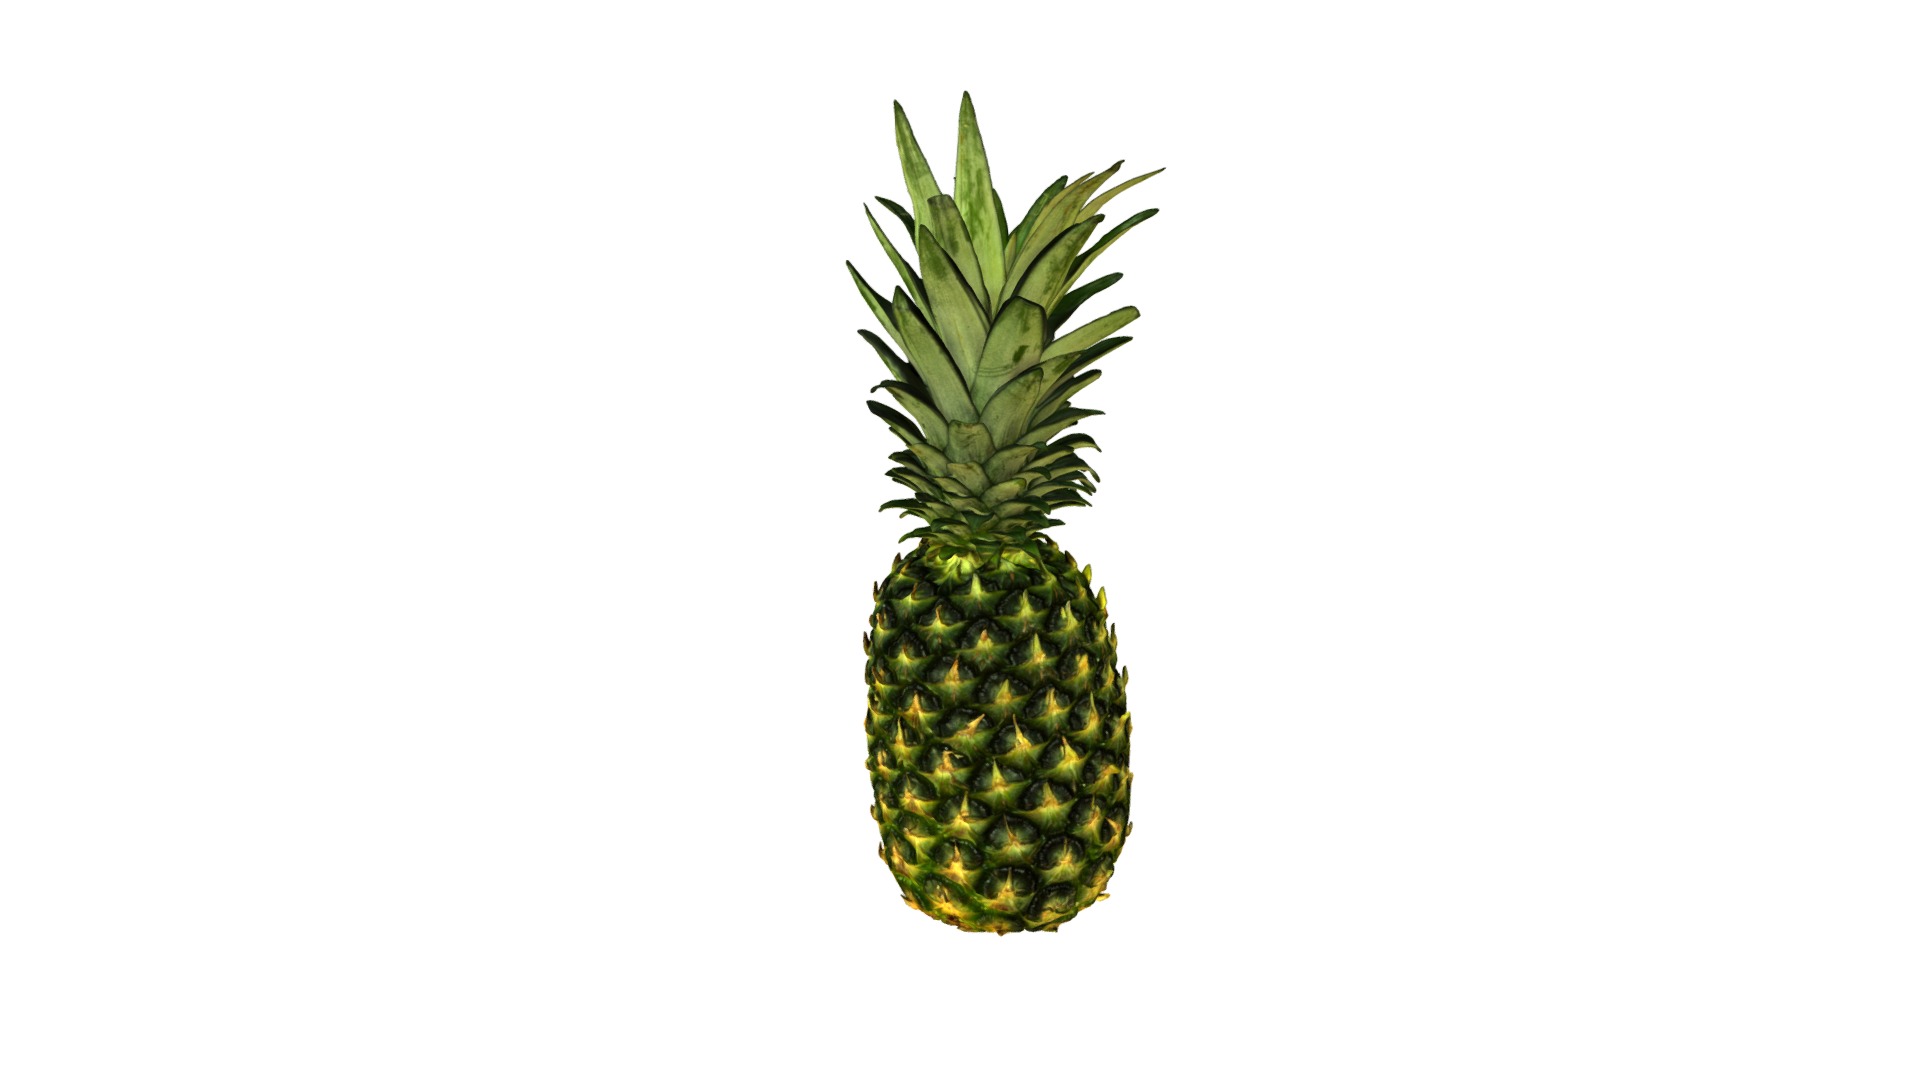 3D model Hi-res Pineapple #3DScanFruitVeg by Skanedo - This is a 3D model of the Hi-res Pineapple #3DScanFruitVeg by Skanedo. The 3D model is about a pineapple with a white background.